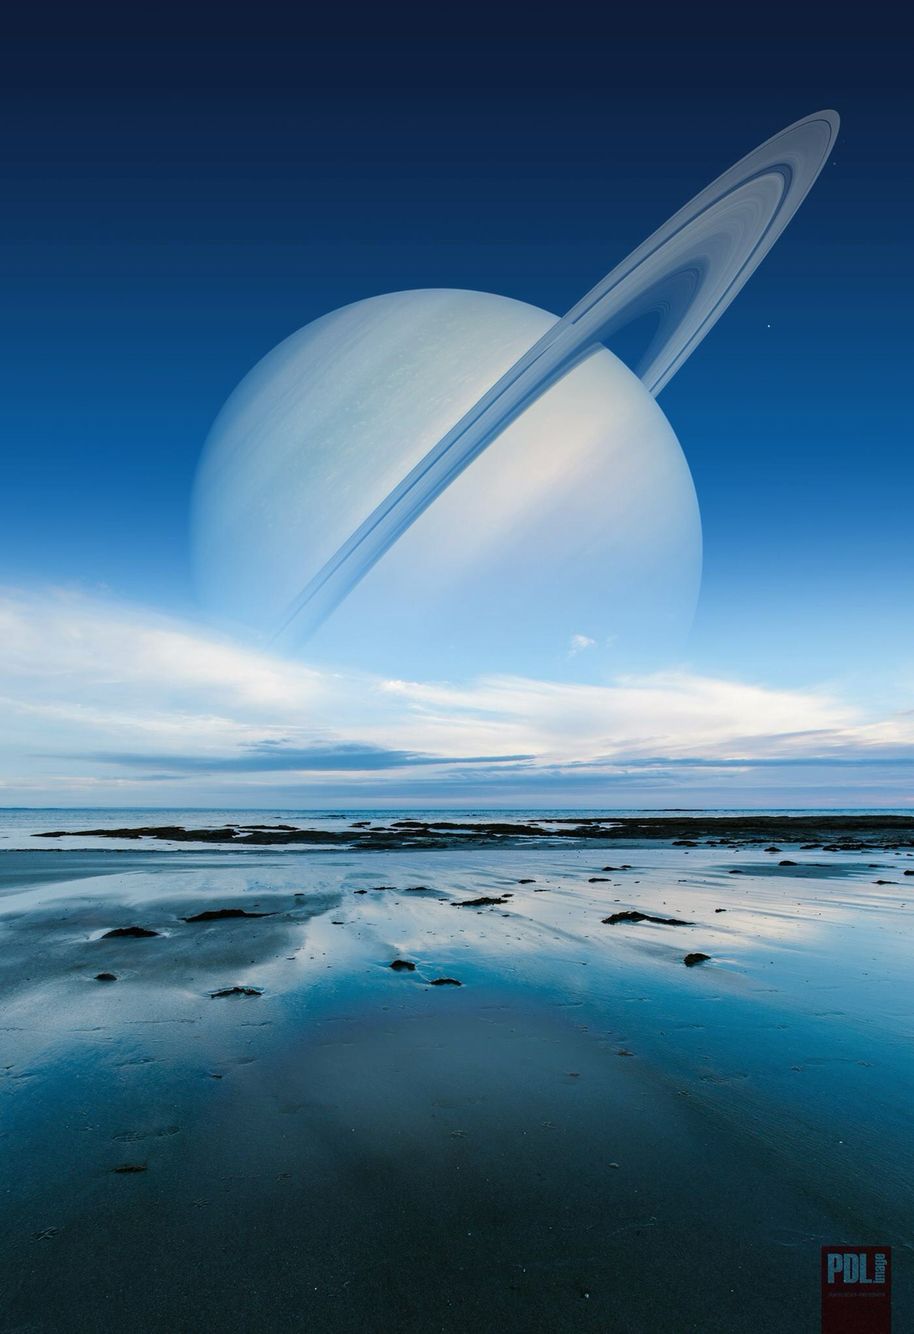 Saturn viewed from Titan. Planets art, Space artwork, Solar system art